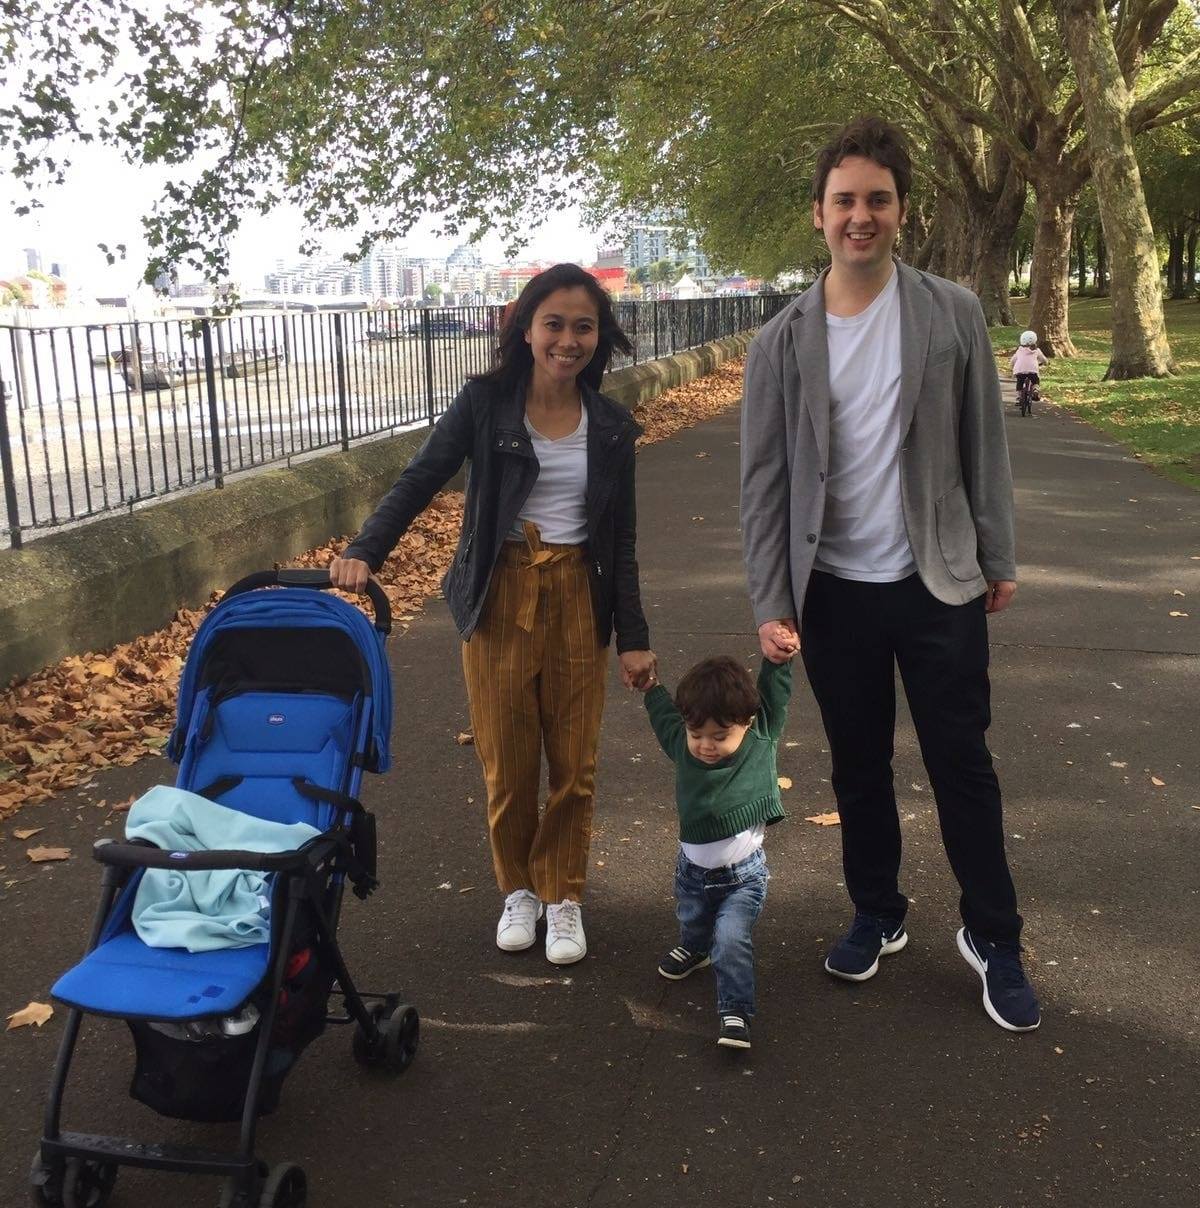 Chris Sharp with his wife and young son, walking along the Embankment in London